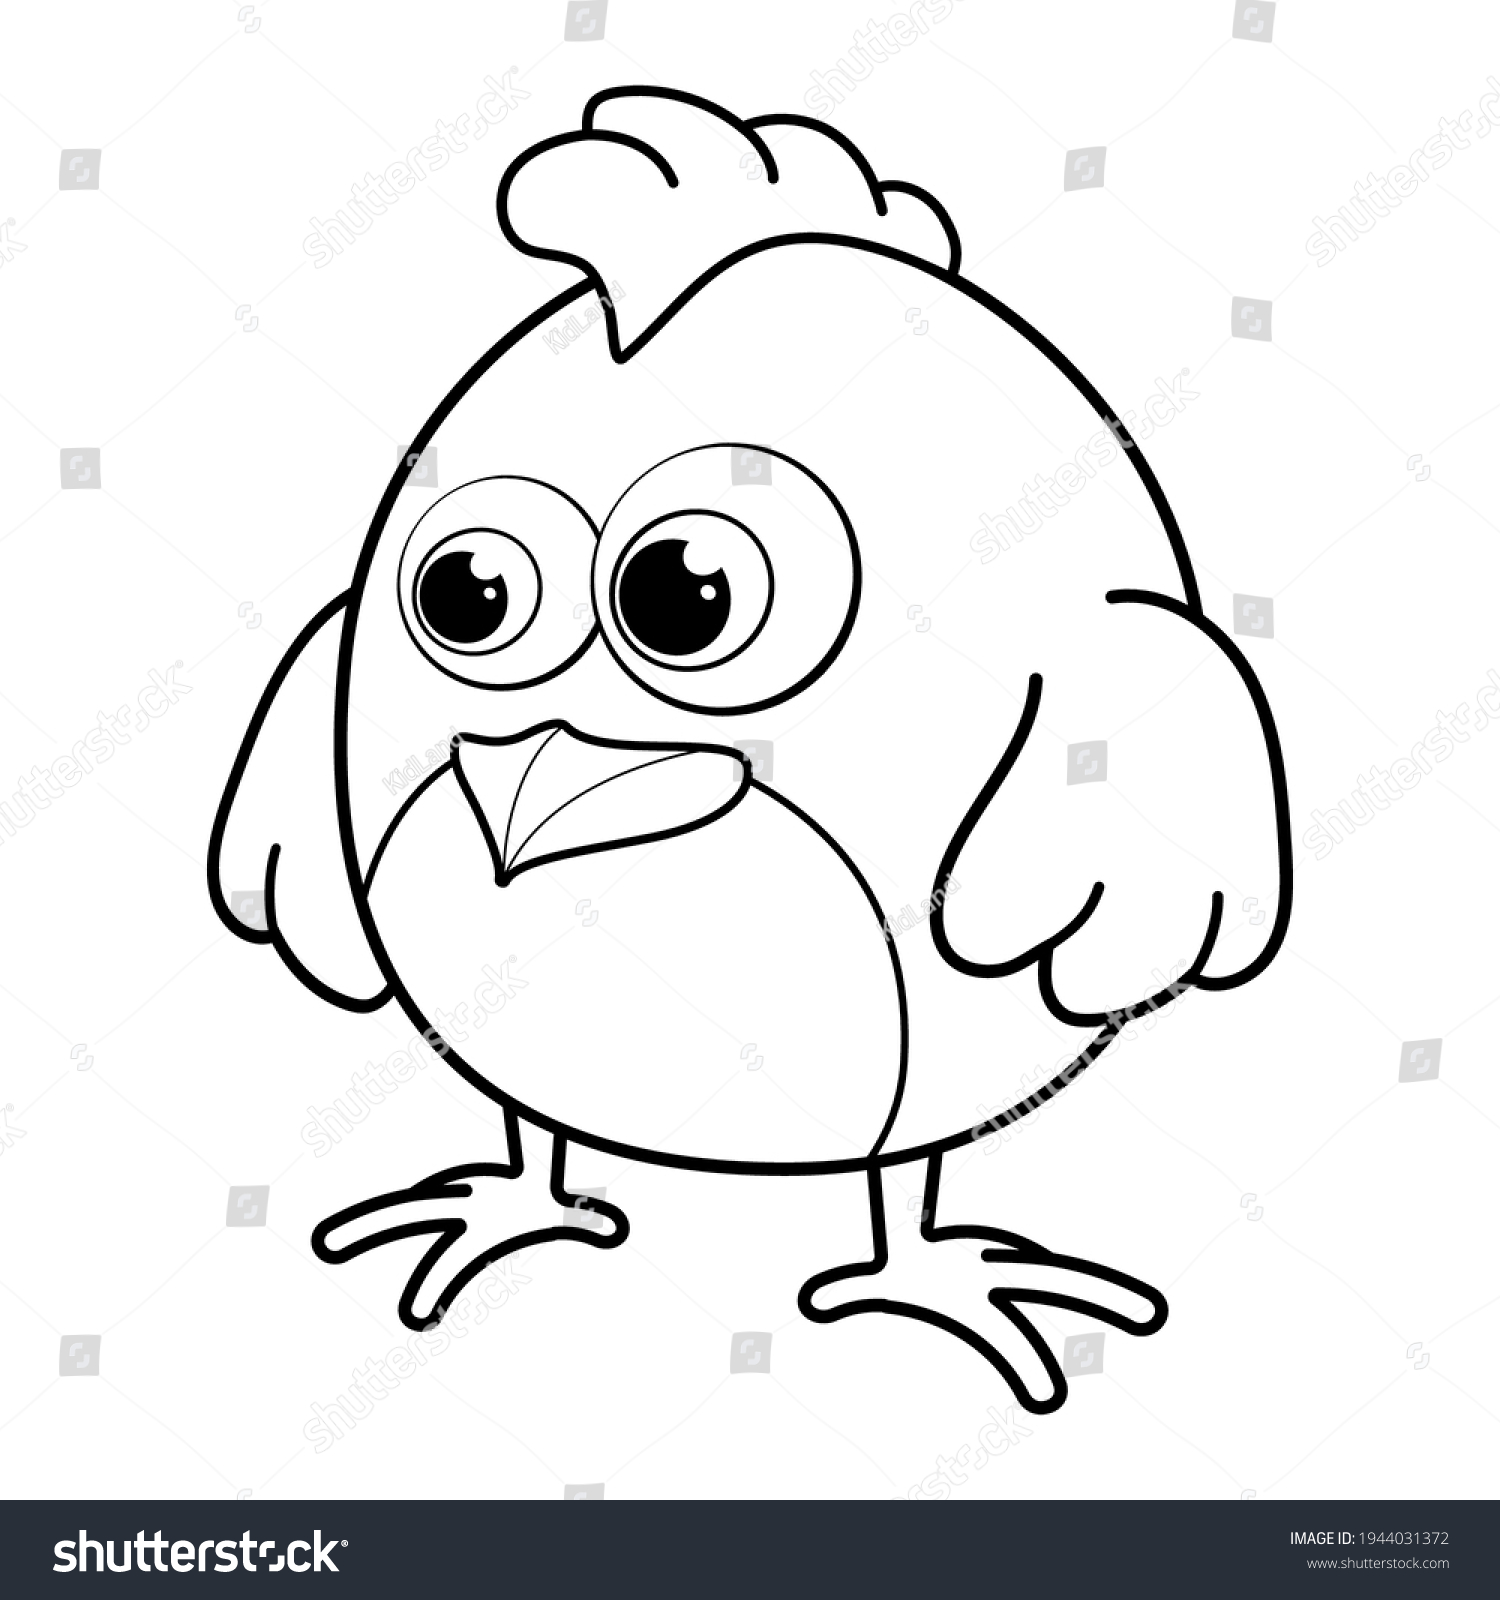 Colorless cartoon chicken coloring pages template stock vector royalty free